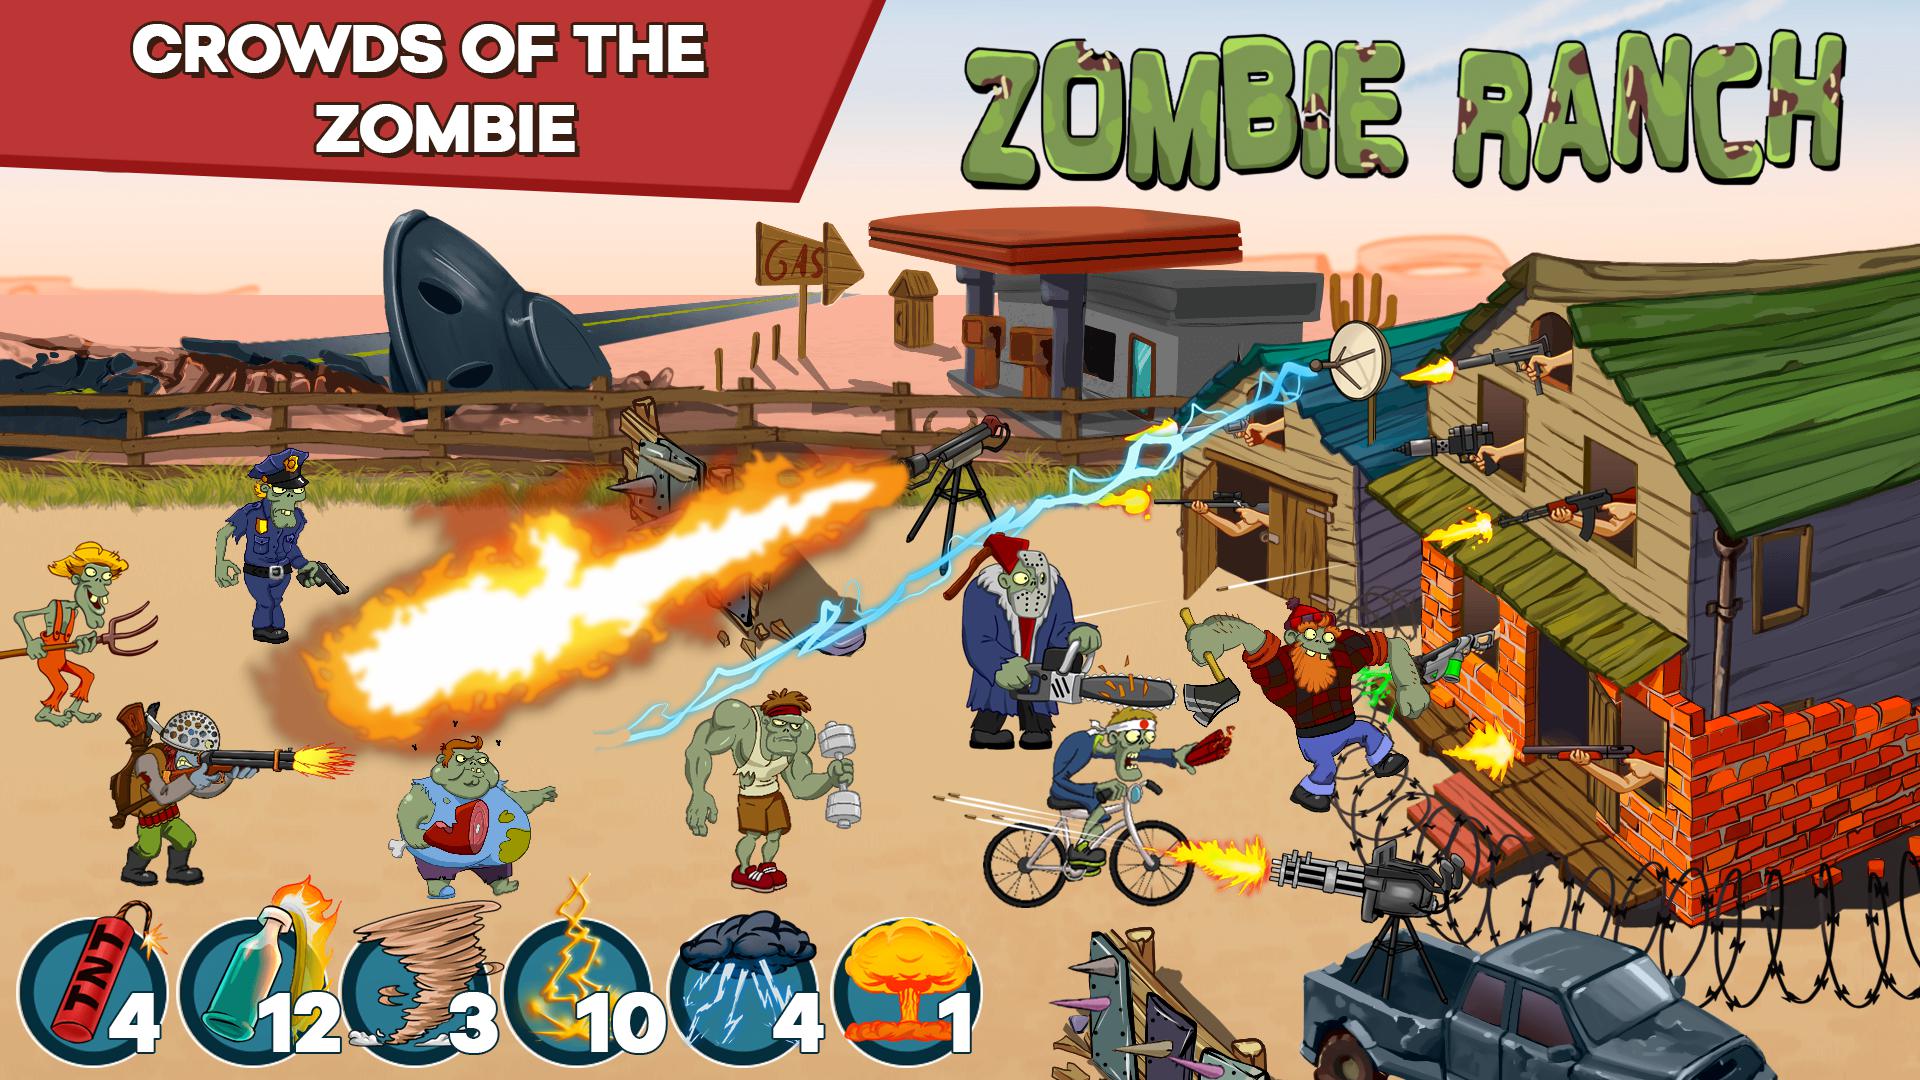 Zombie Ranch - Battle with the zombie_截图_2